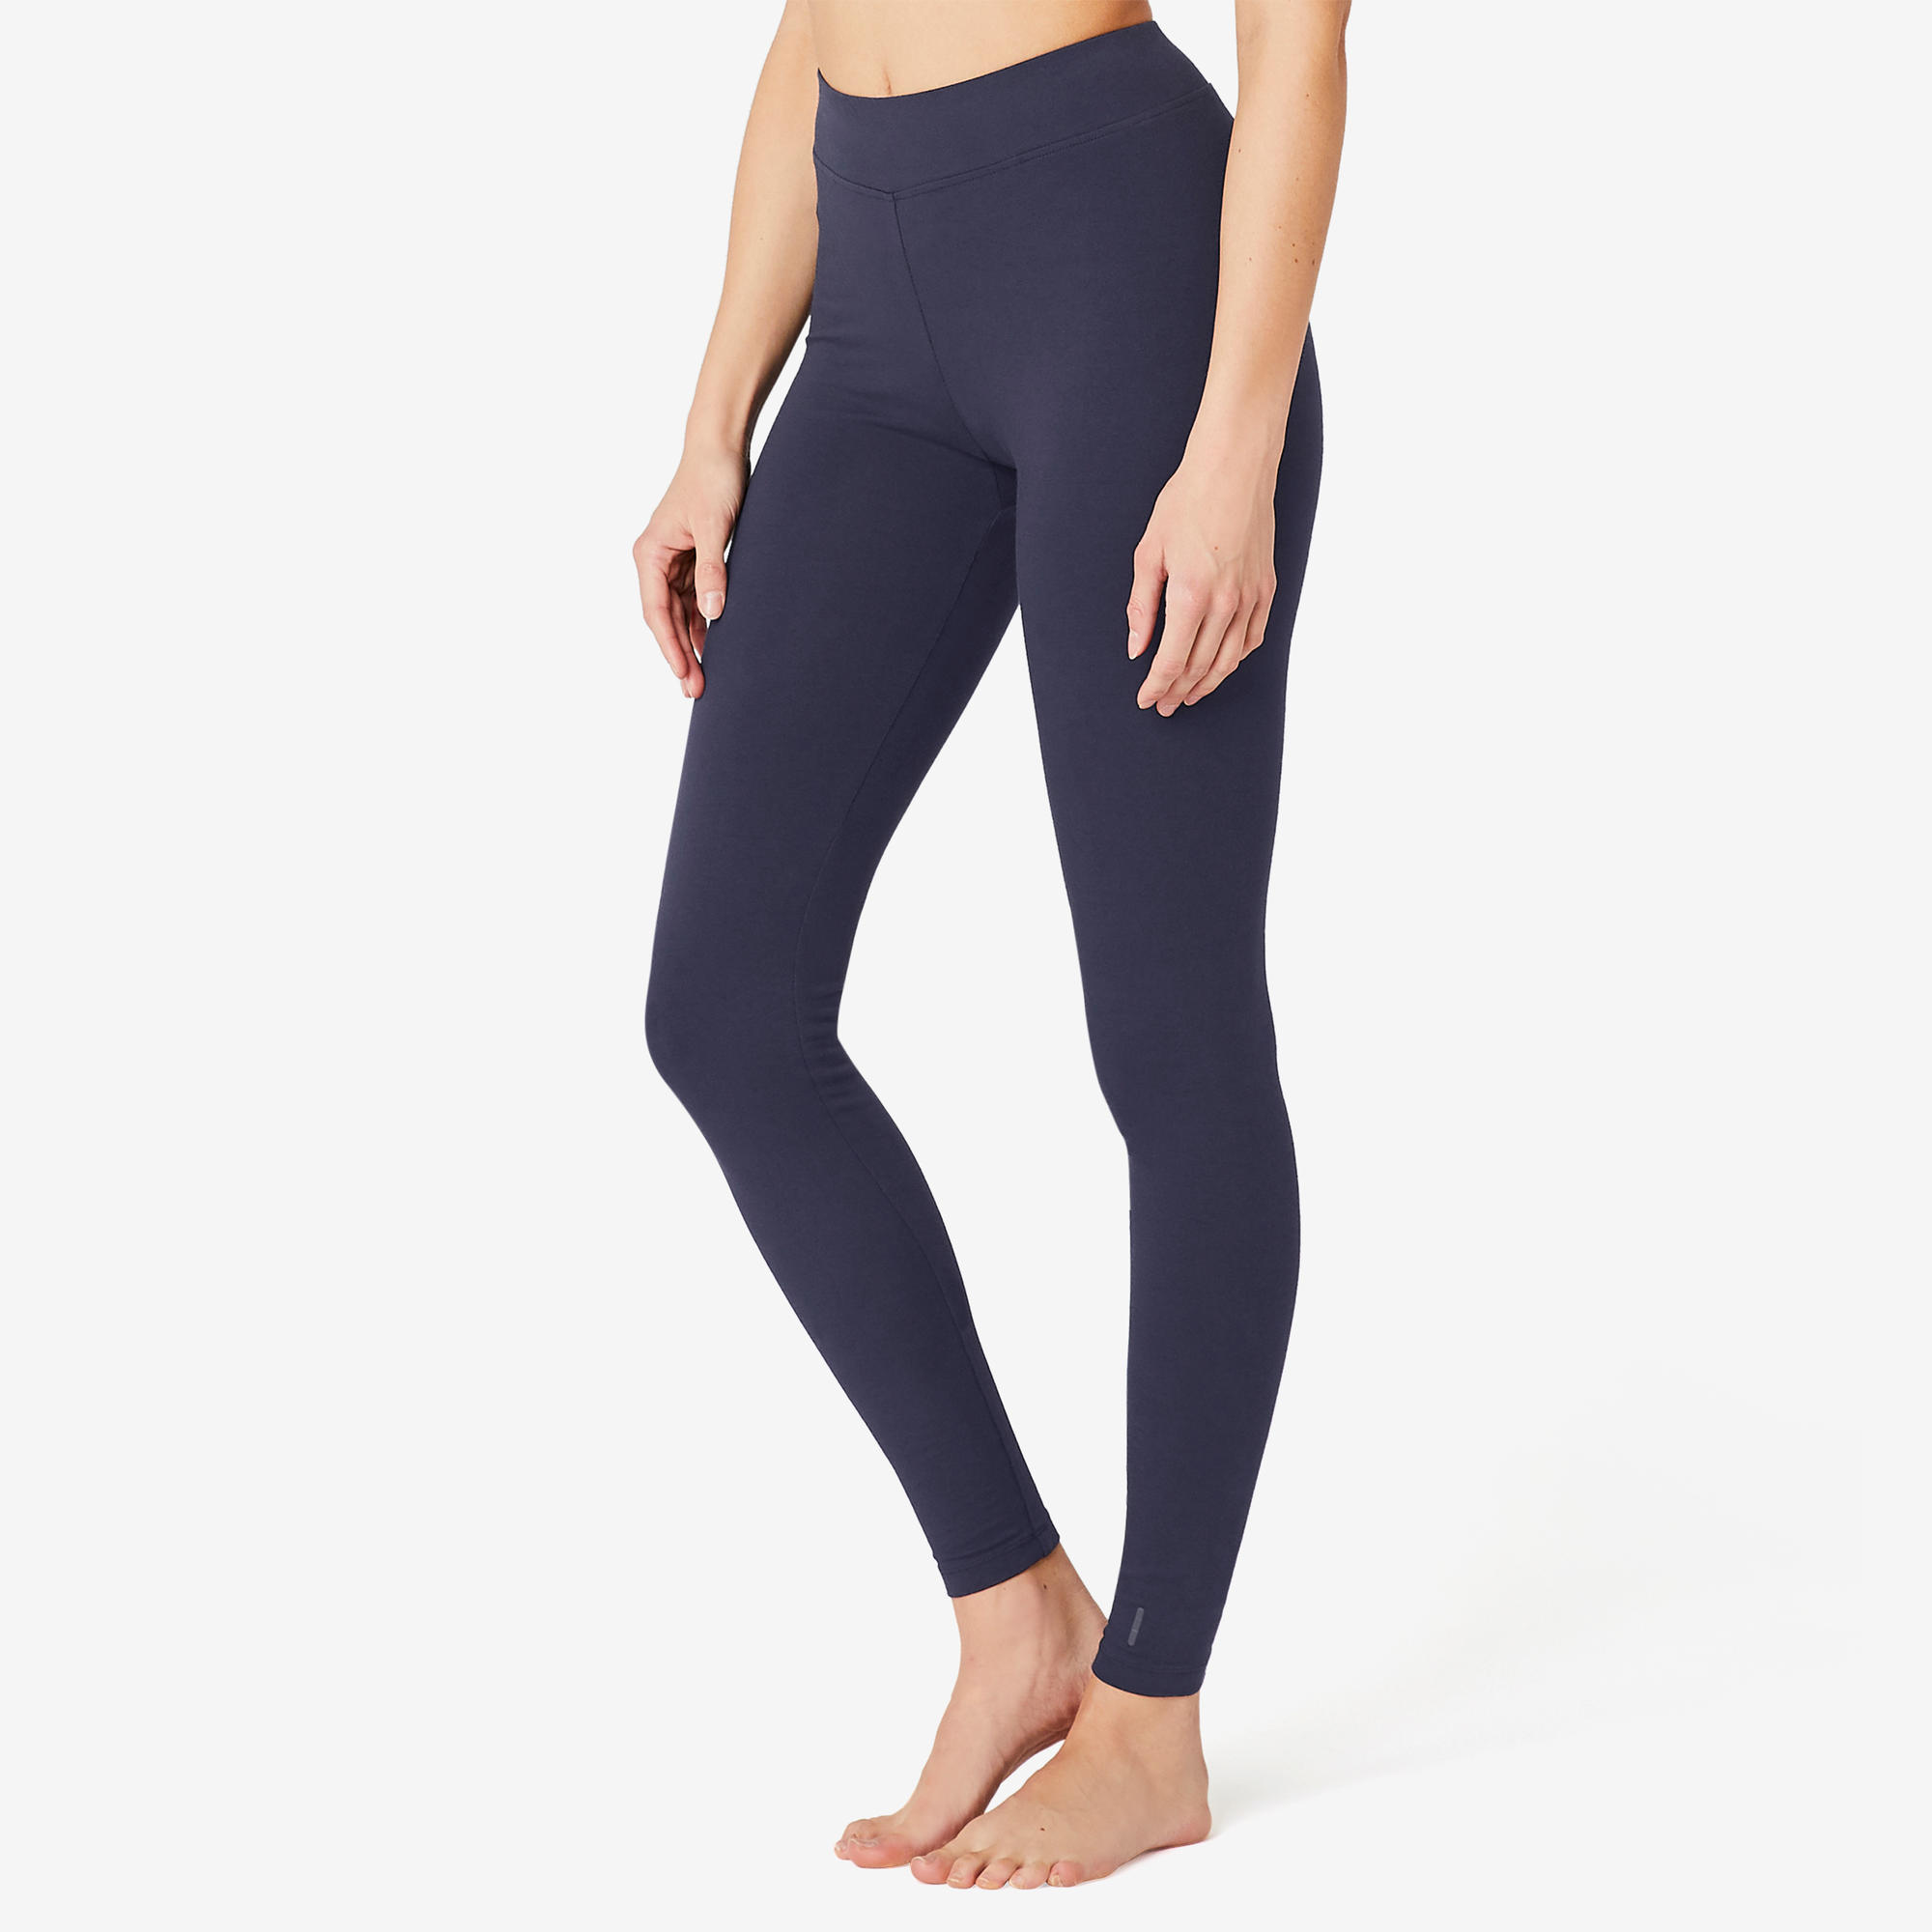 Decathlon Running Leggings Reviews Pants  International Society of  Precision Agriculture